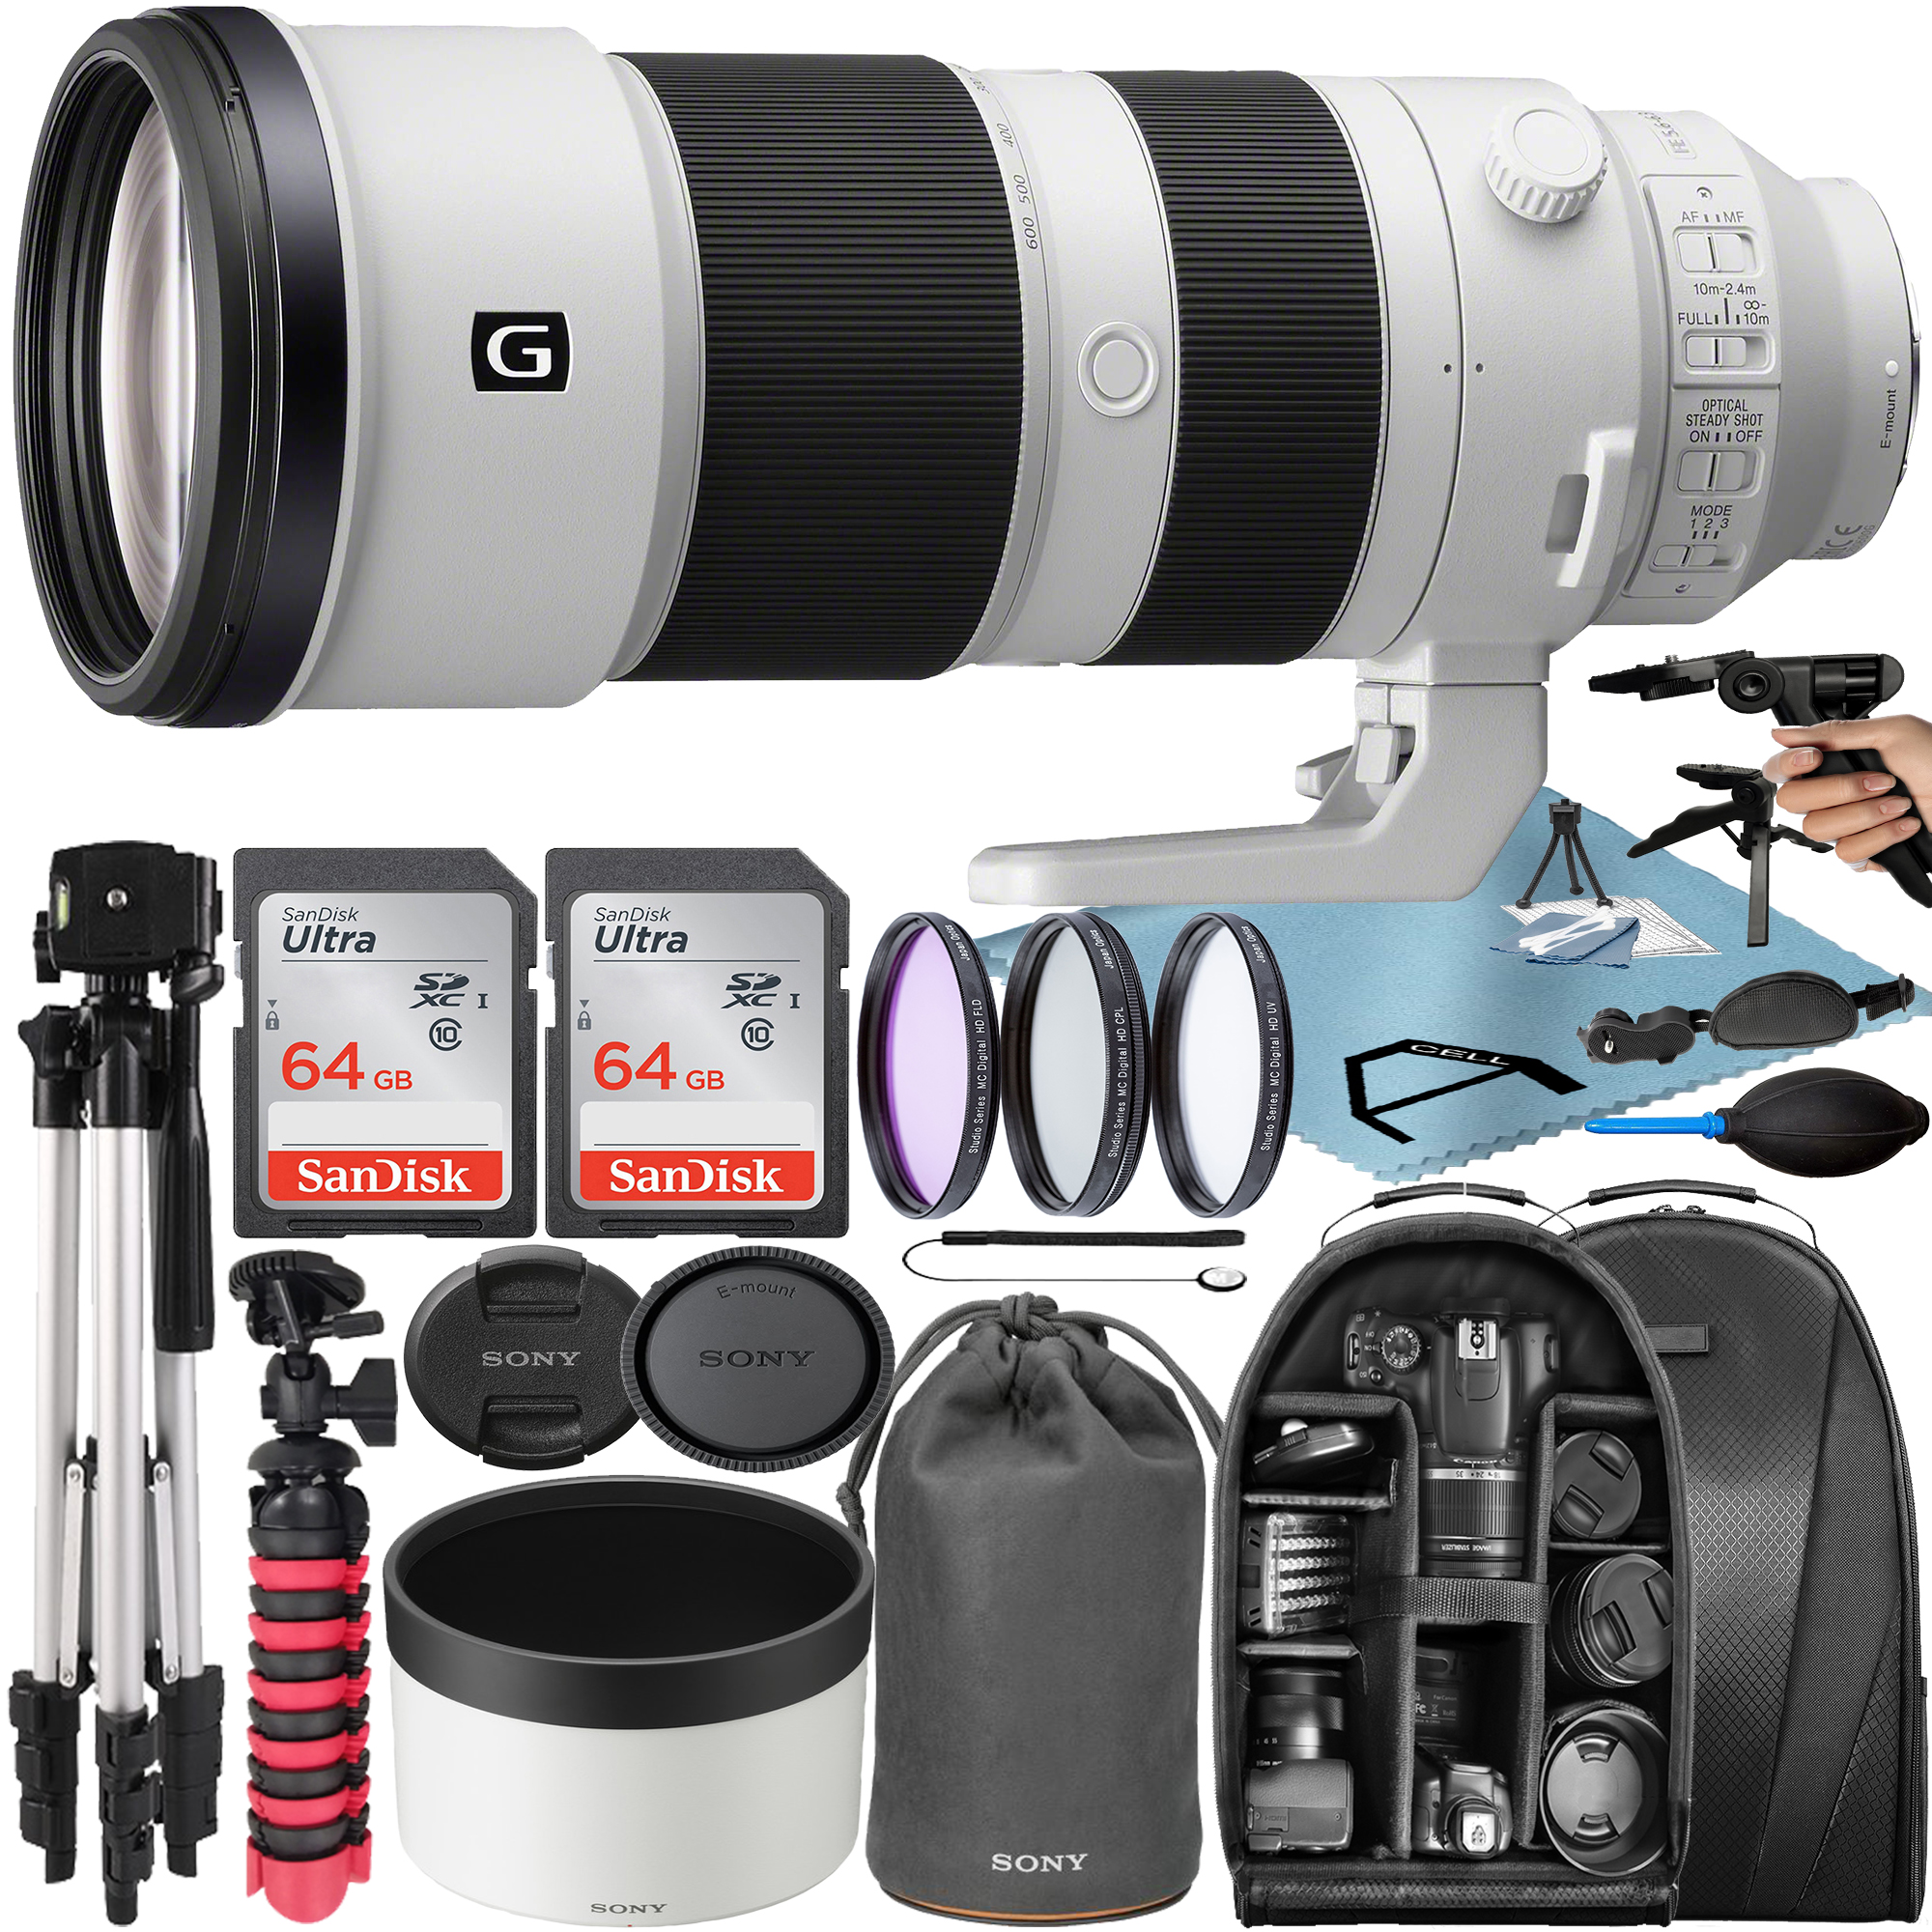 Sony FE 200-600mm F/5.6-6.3 G OSS Lens with 2 Pack 64GB SanDisk Memory Card + Tripod + Backpack + A-Cell Accessory Bundle